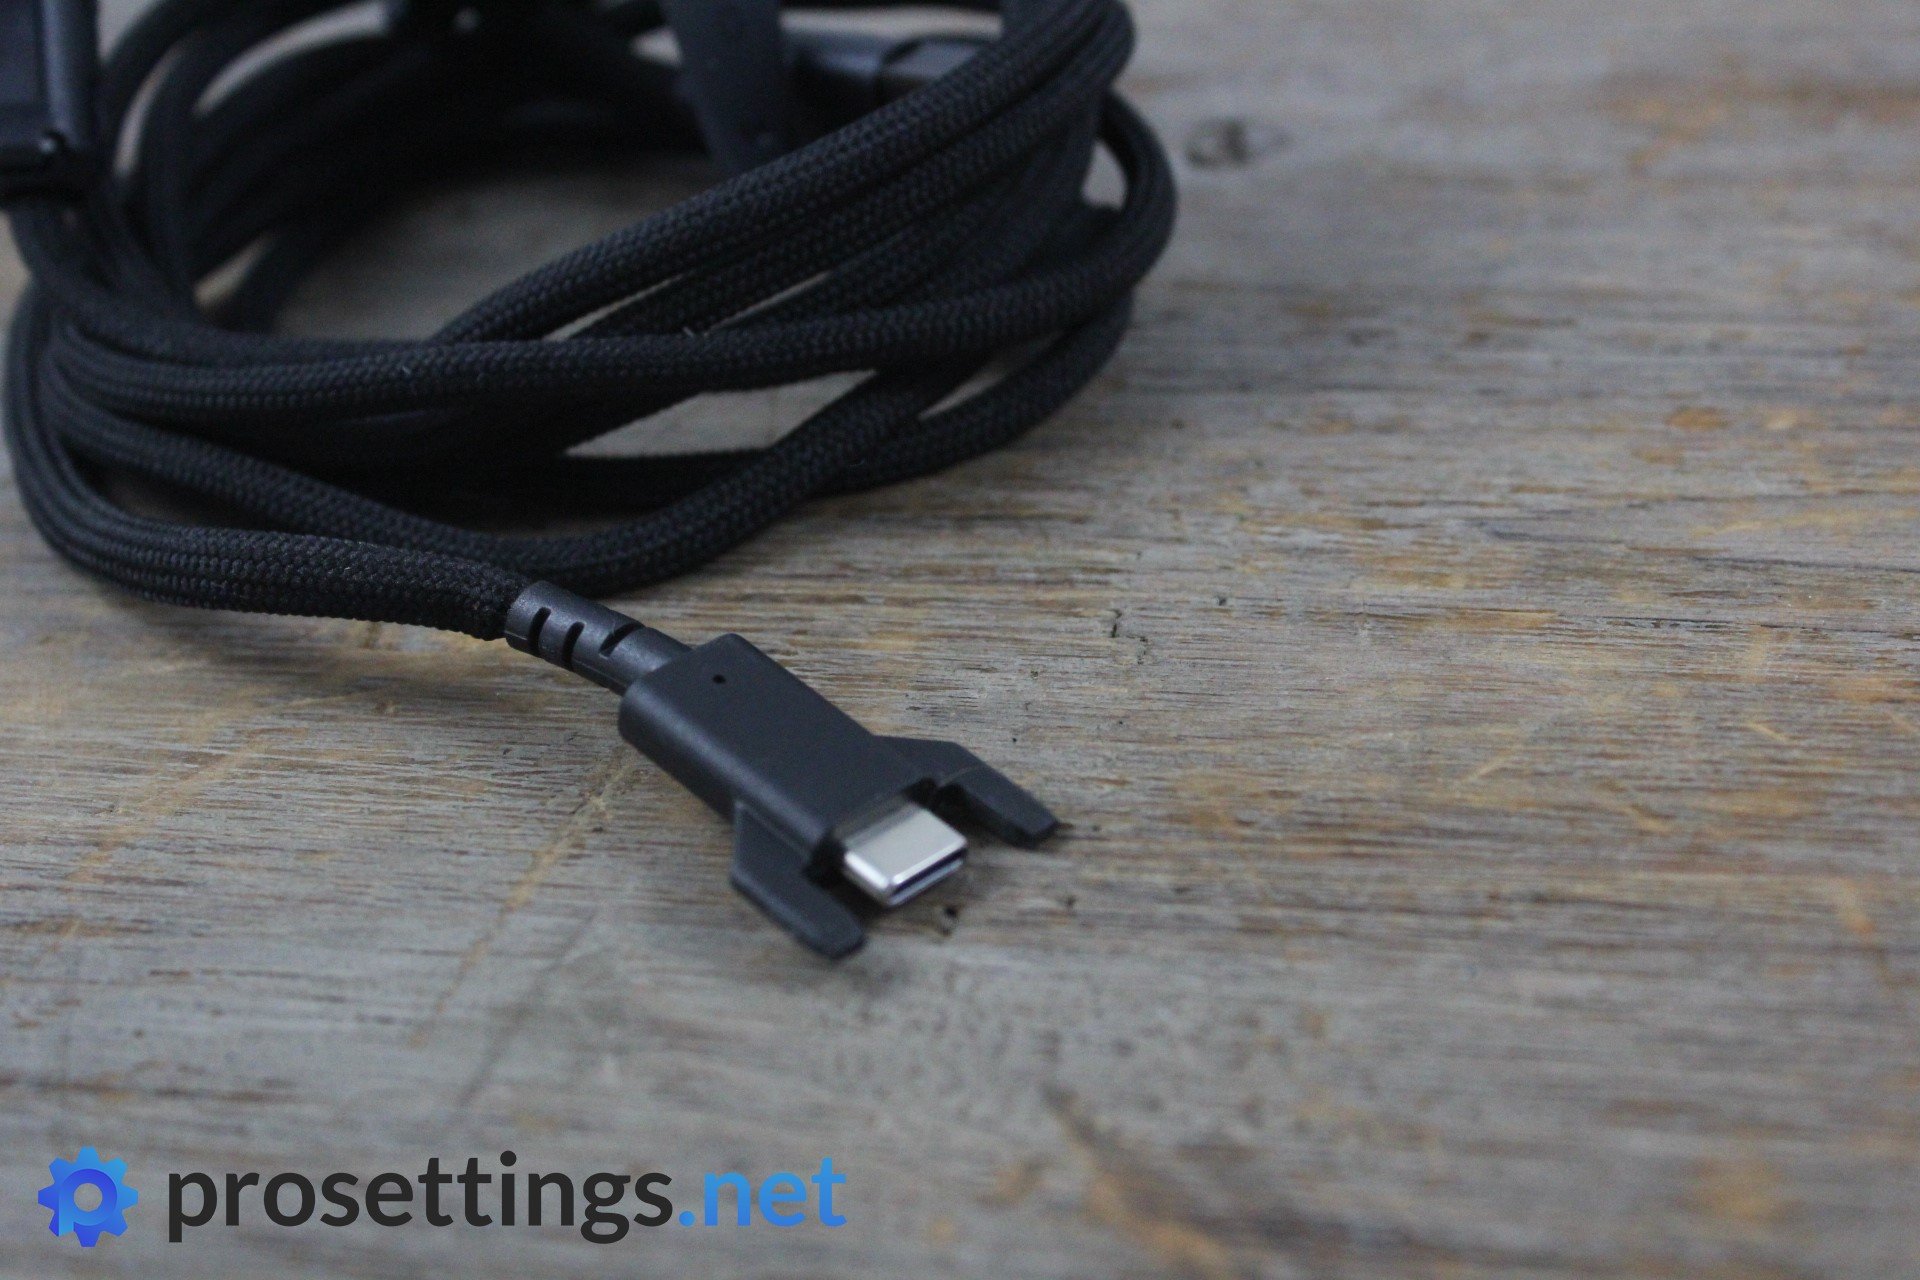 VAXEE XE Review Cable